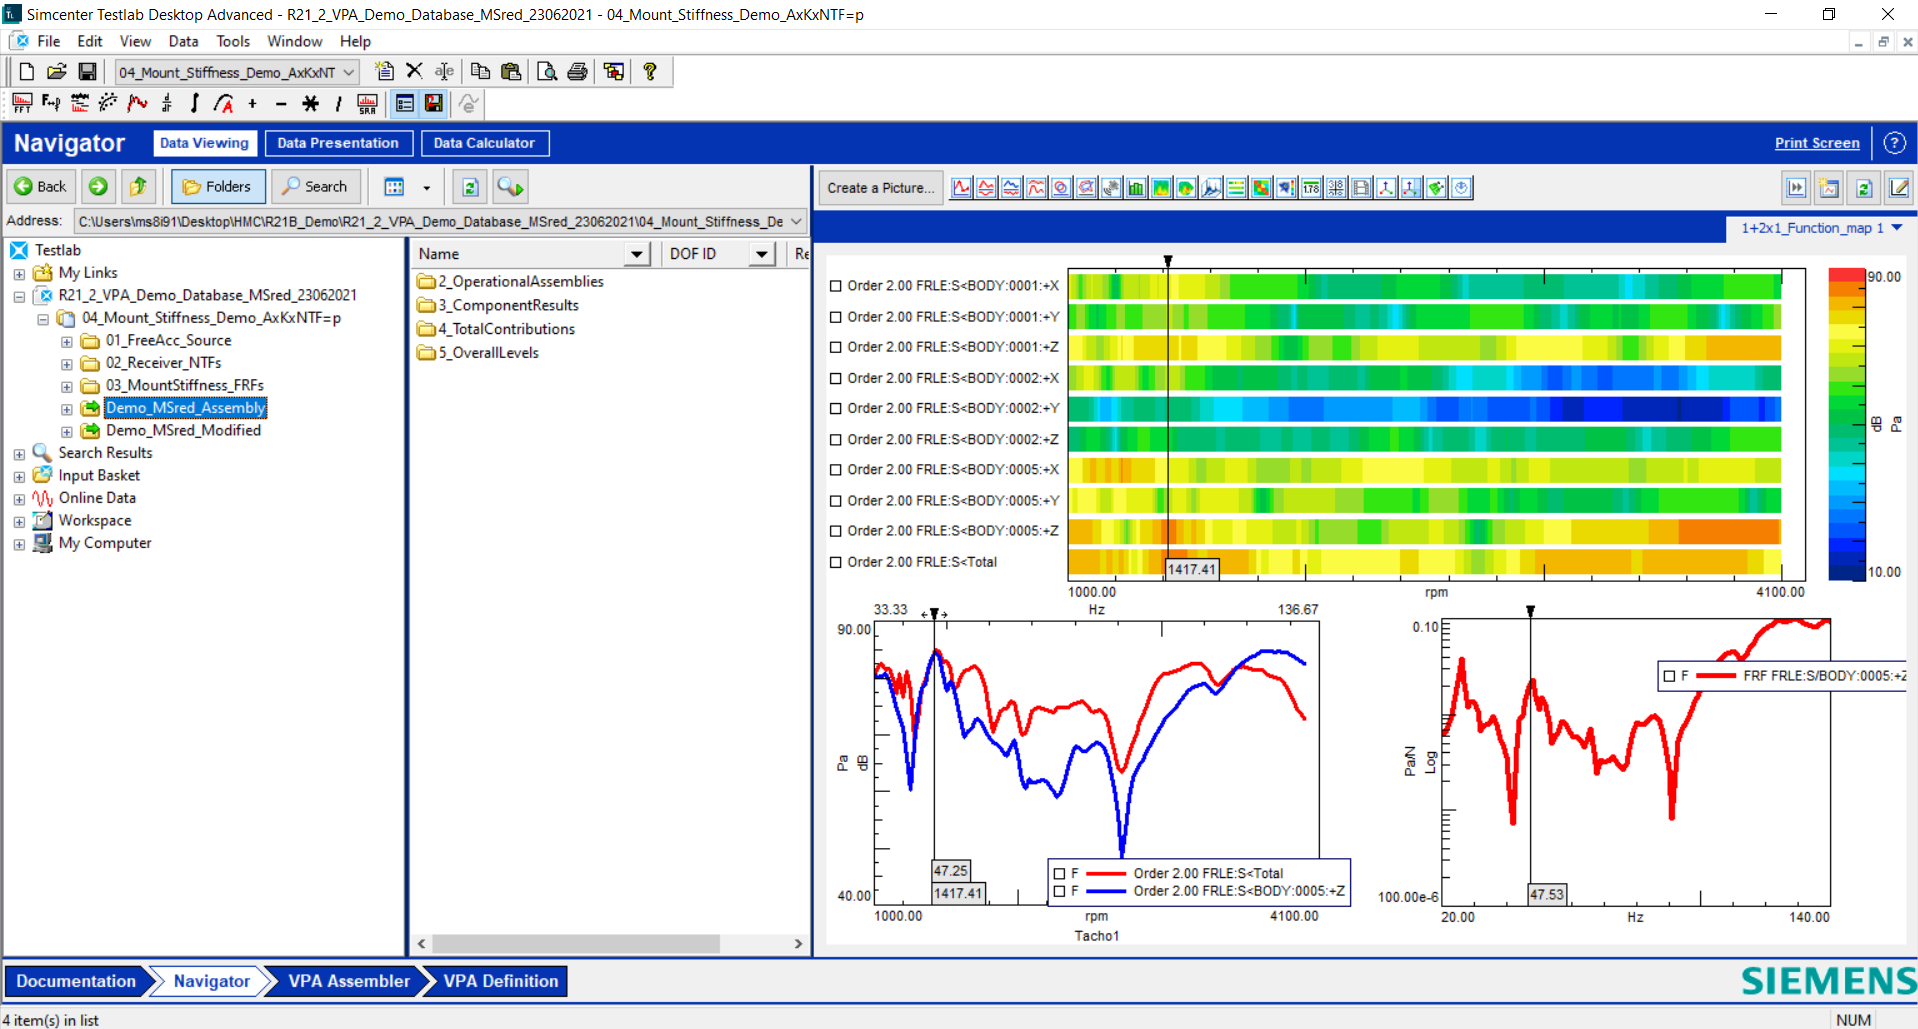 Analyzing prediction results of an assembly in Simcenter Testlab software

